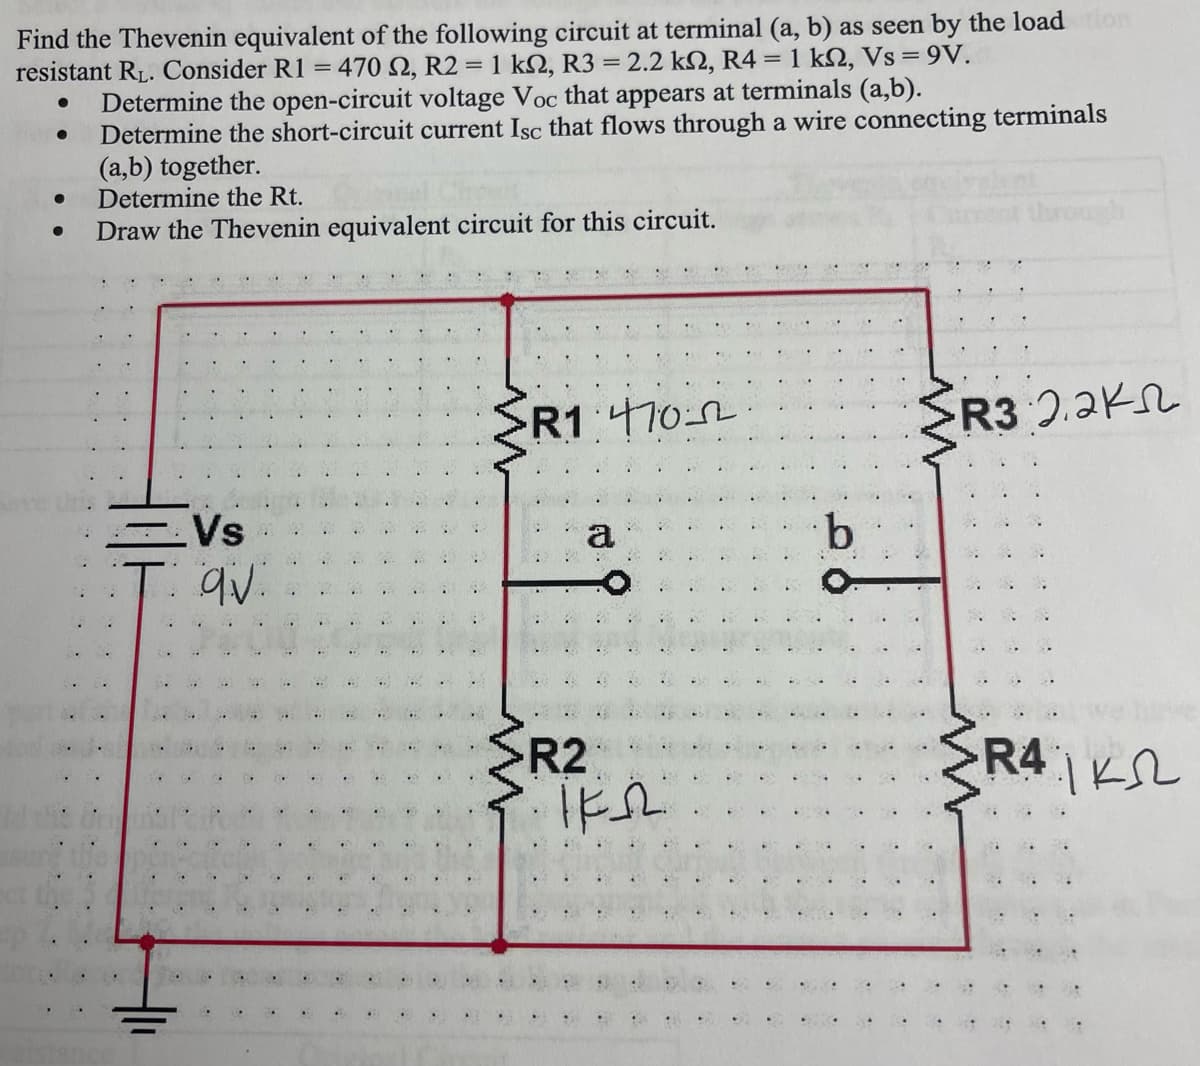 Find the Thevenin equivalent of the following circuit at terminal (a, b) as seen by the load tion
resistant R₁. Consider R1 = 470 2, R2 = 1 ks, R3 = 2.2 kn, R4 = 1 kN, Vs = 9V.
●
Determine the open-circuit voltage Voc that appears at terminals (a,b).
Determine the short-circuit current Isc that flows through a wire connecting terminals
(a,b) together.
● Determine the Rt.
Draw the Thevenin equivalent circuit for this circuit.
●
Vs
qv.
SR1.4702
a
R2
IFR
·b
R3 2.2K
www
RAK
..
..
..
.
.
.